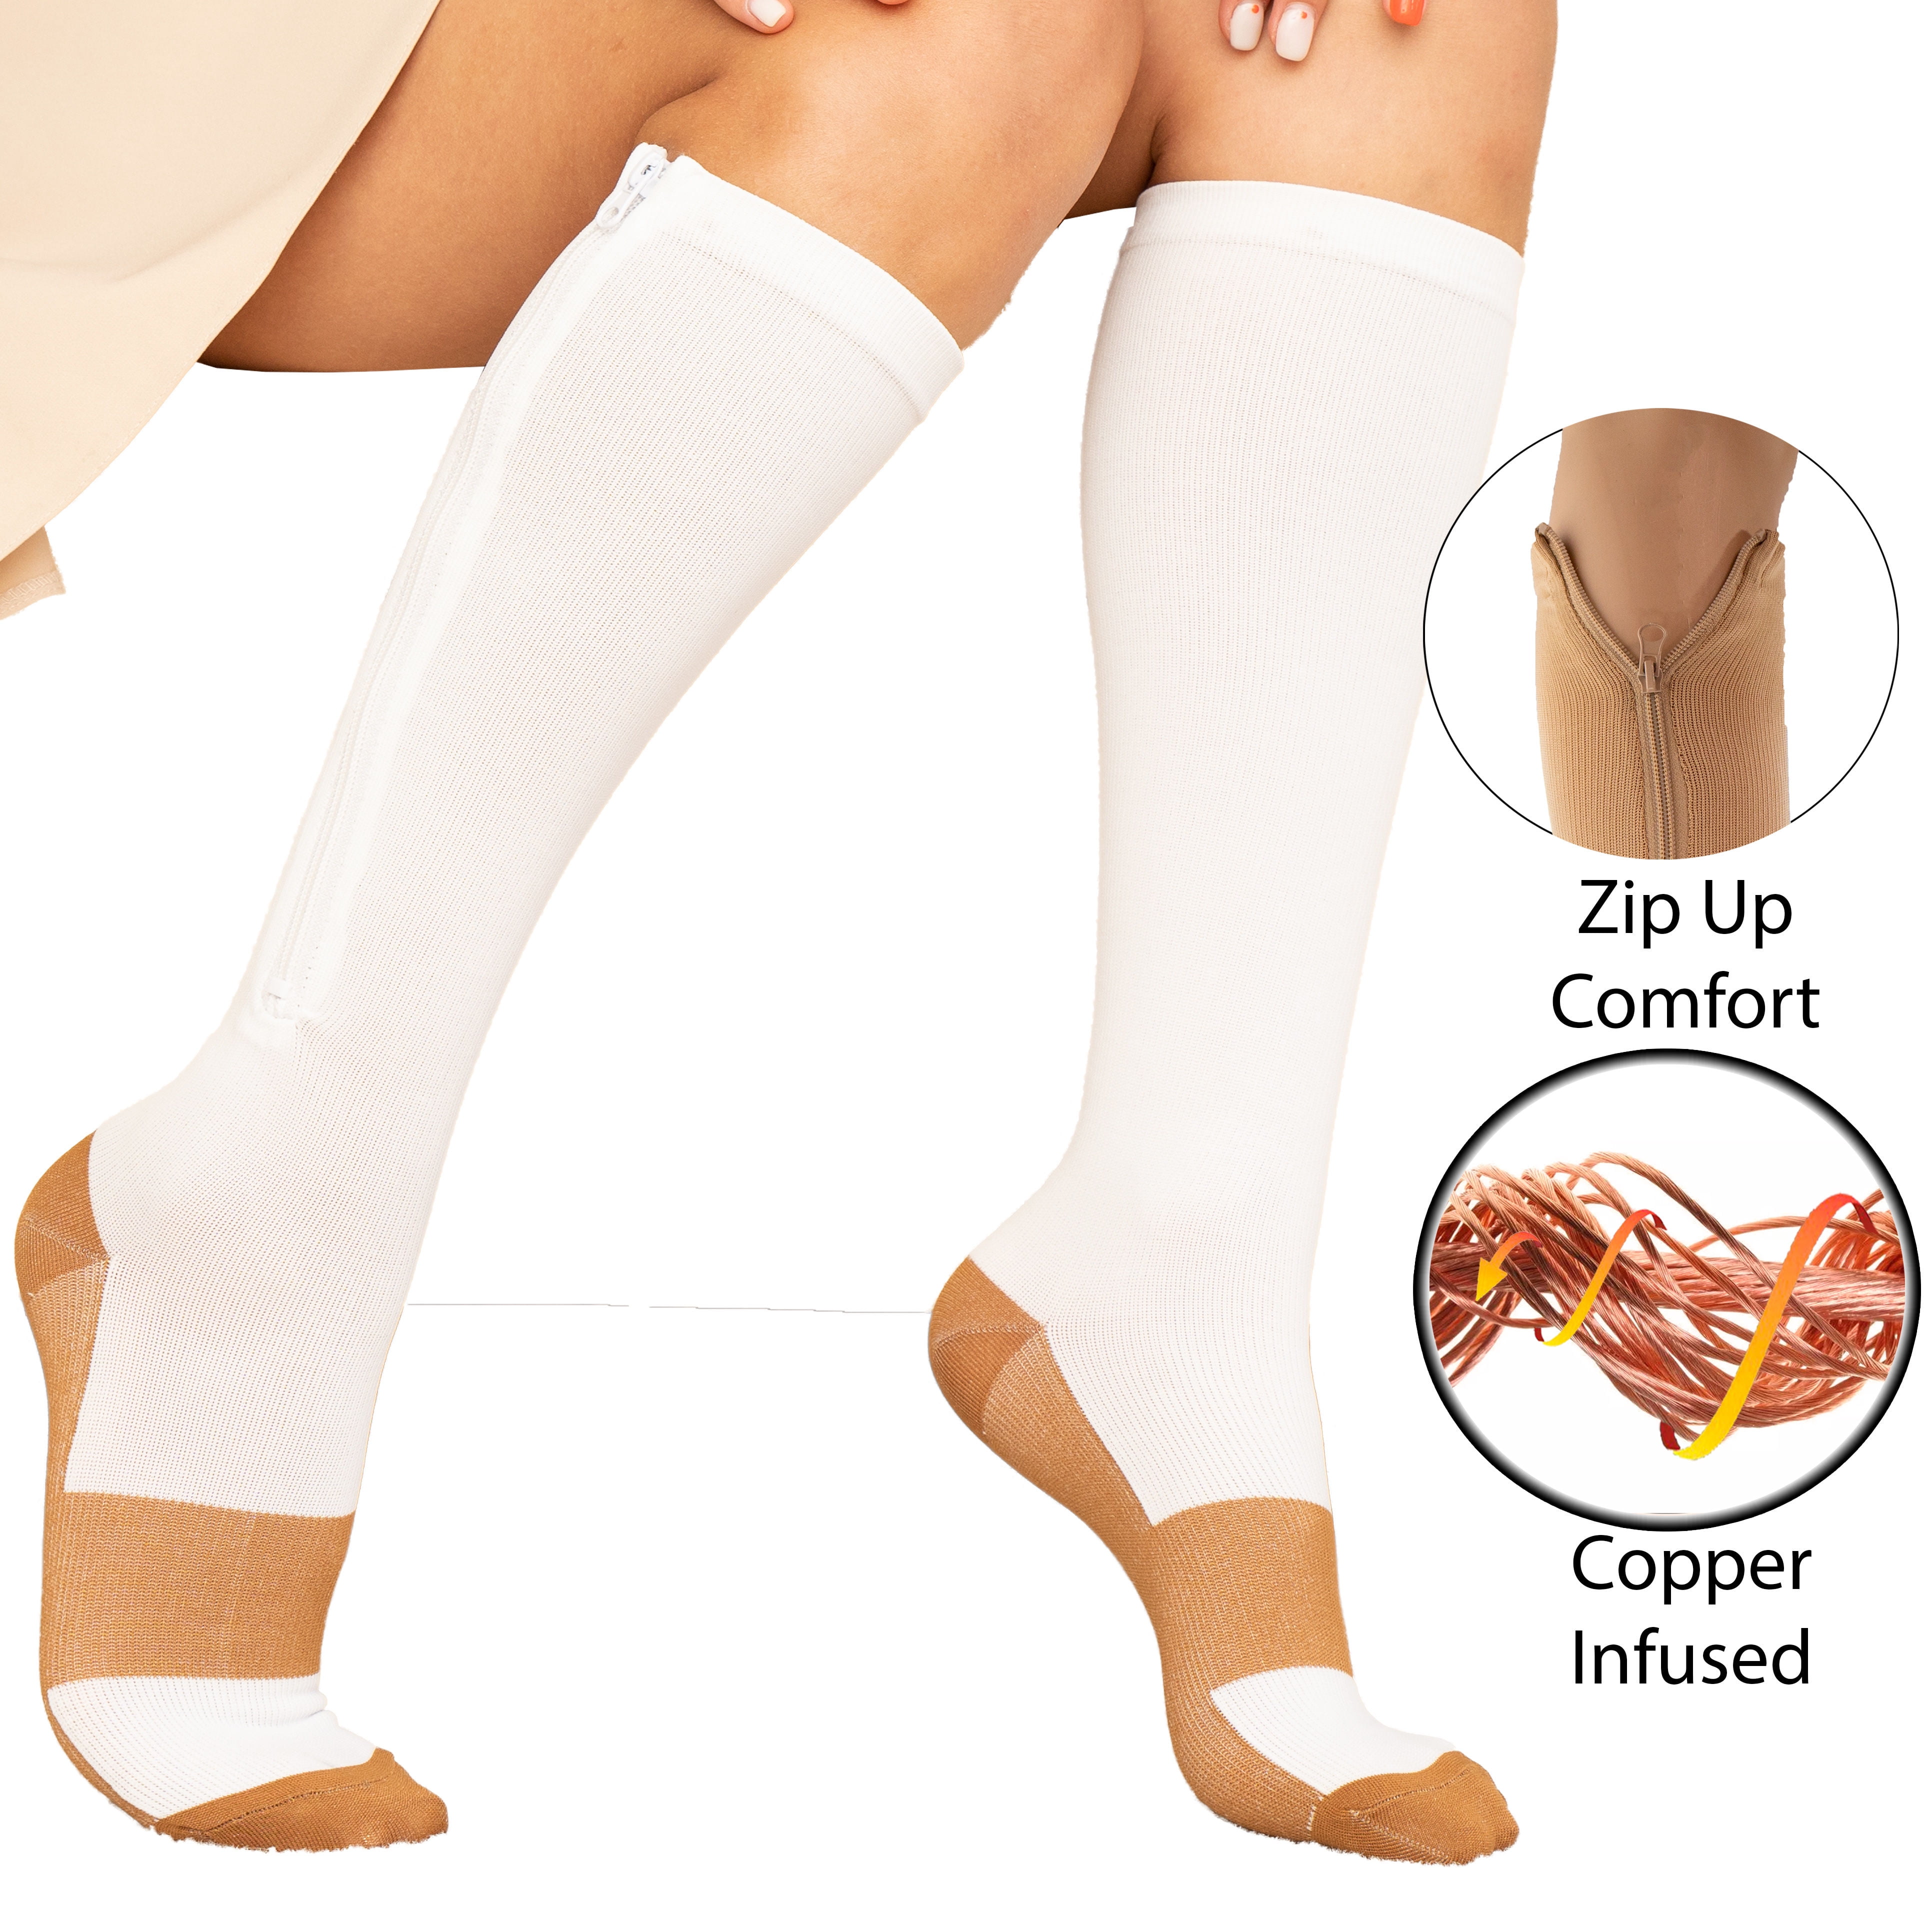 Copper Zipper Compression Socks w/ Closed Toe Knee High Support Stockings -  Soft, Breathable Compression Socks For Support, Reduce Swelling & Better  Circulation - Nude Regular (2 Pairs) 